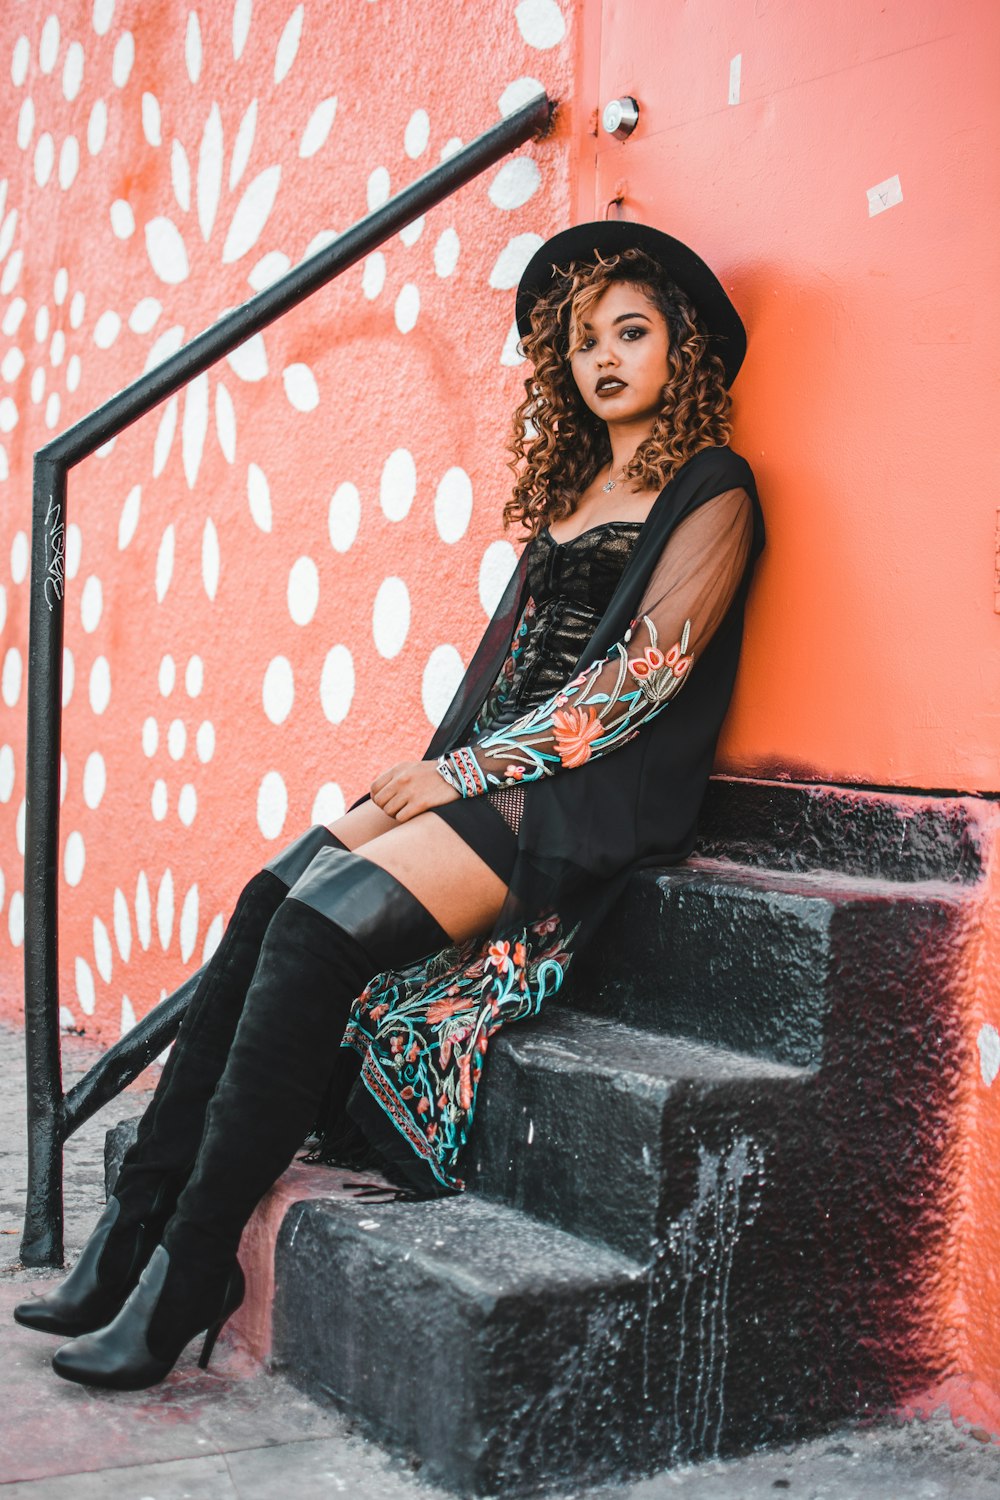 woman wearing black mini dress and black thigh-high boots sitting in front  of closed door photo – Free Miami Image on Unsplash